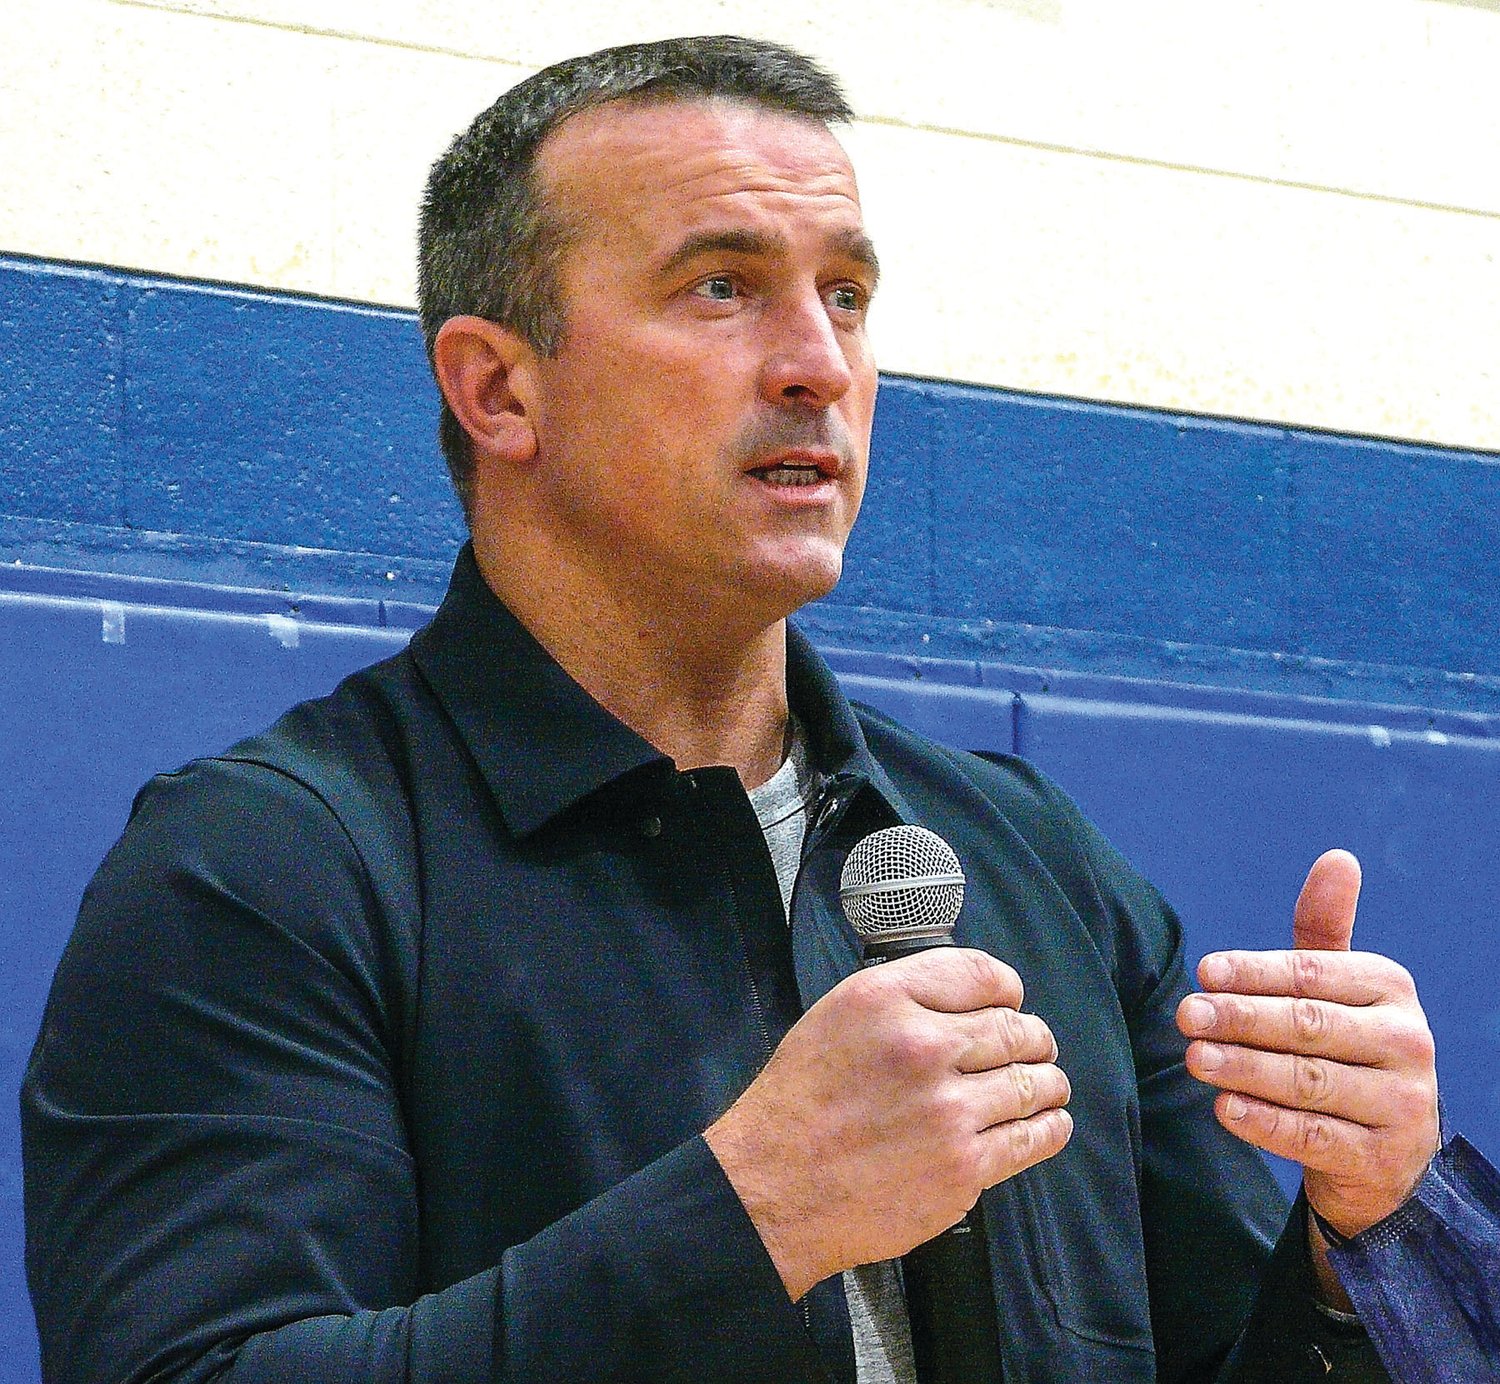 Chris Herren discusses his past drug addiction in a talk with students at Del Val High School.